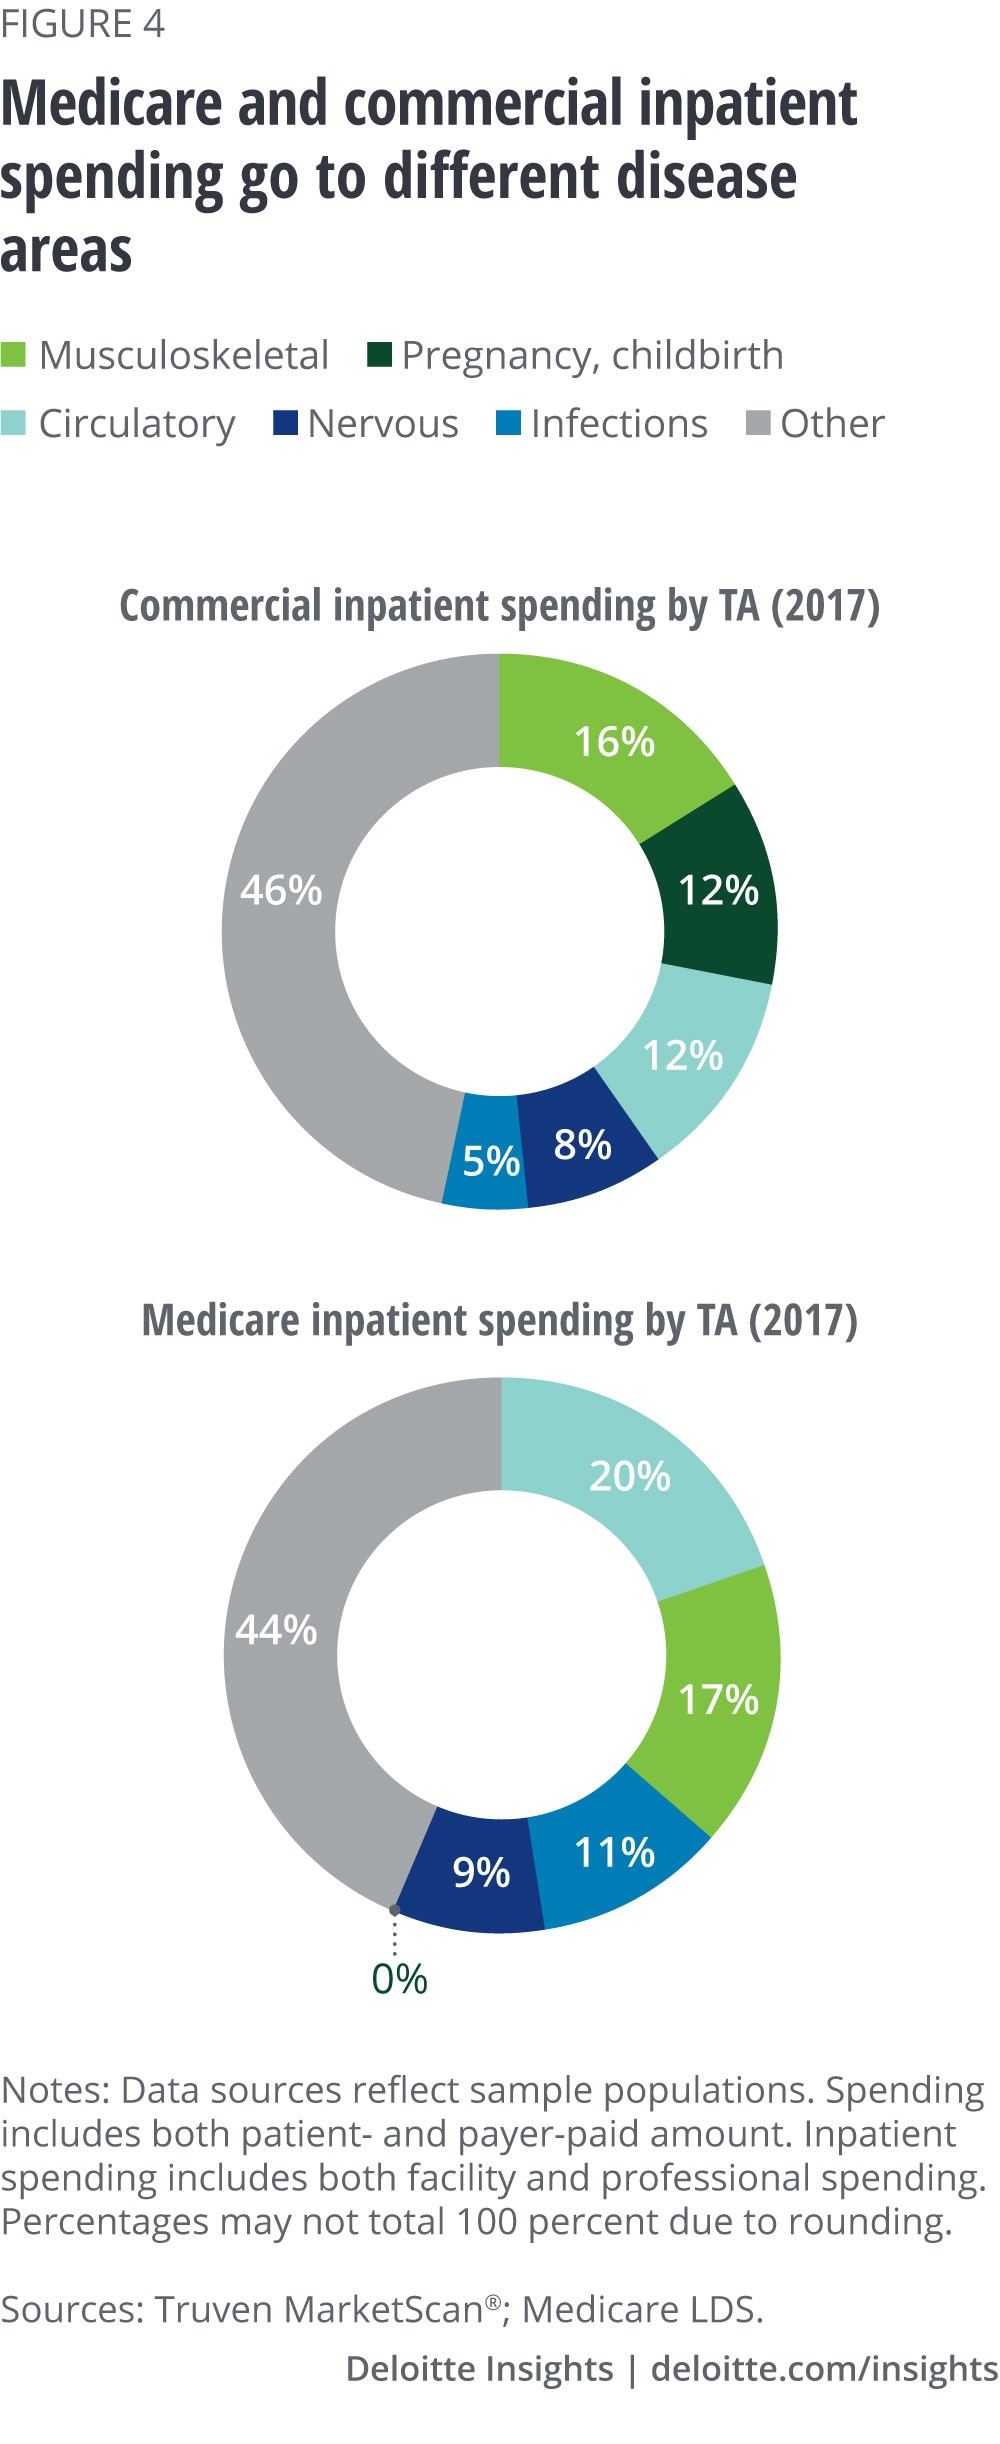 Medicare and commercial inpatient spending go to different disease areas